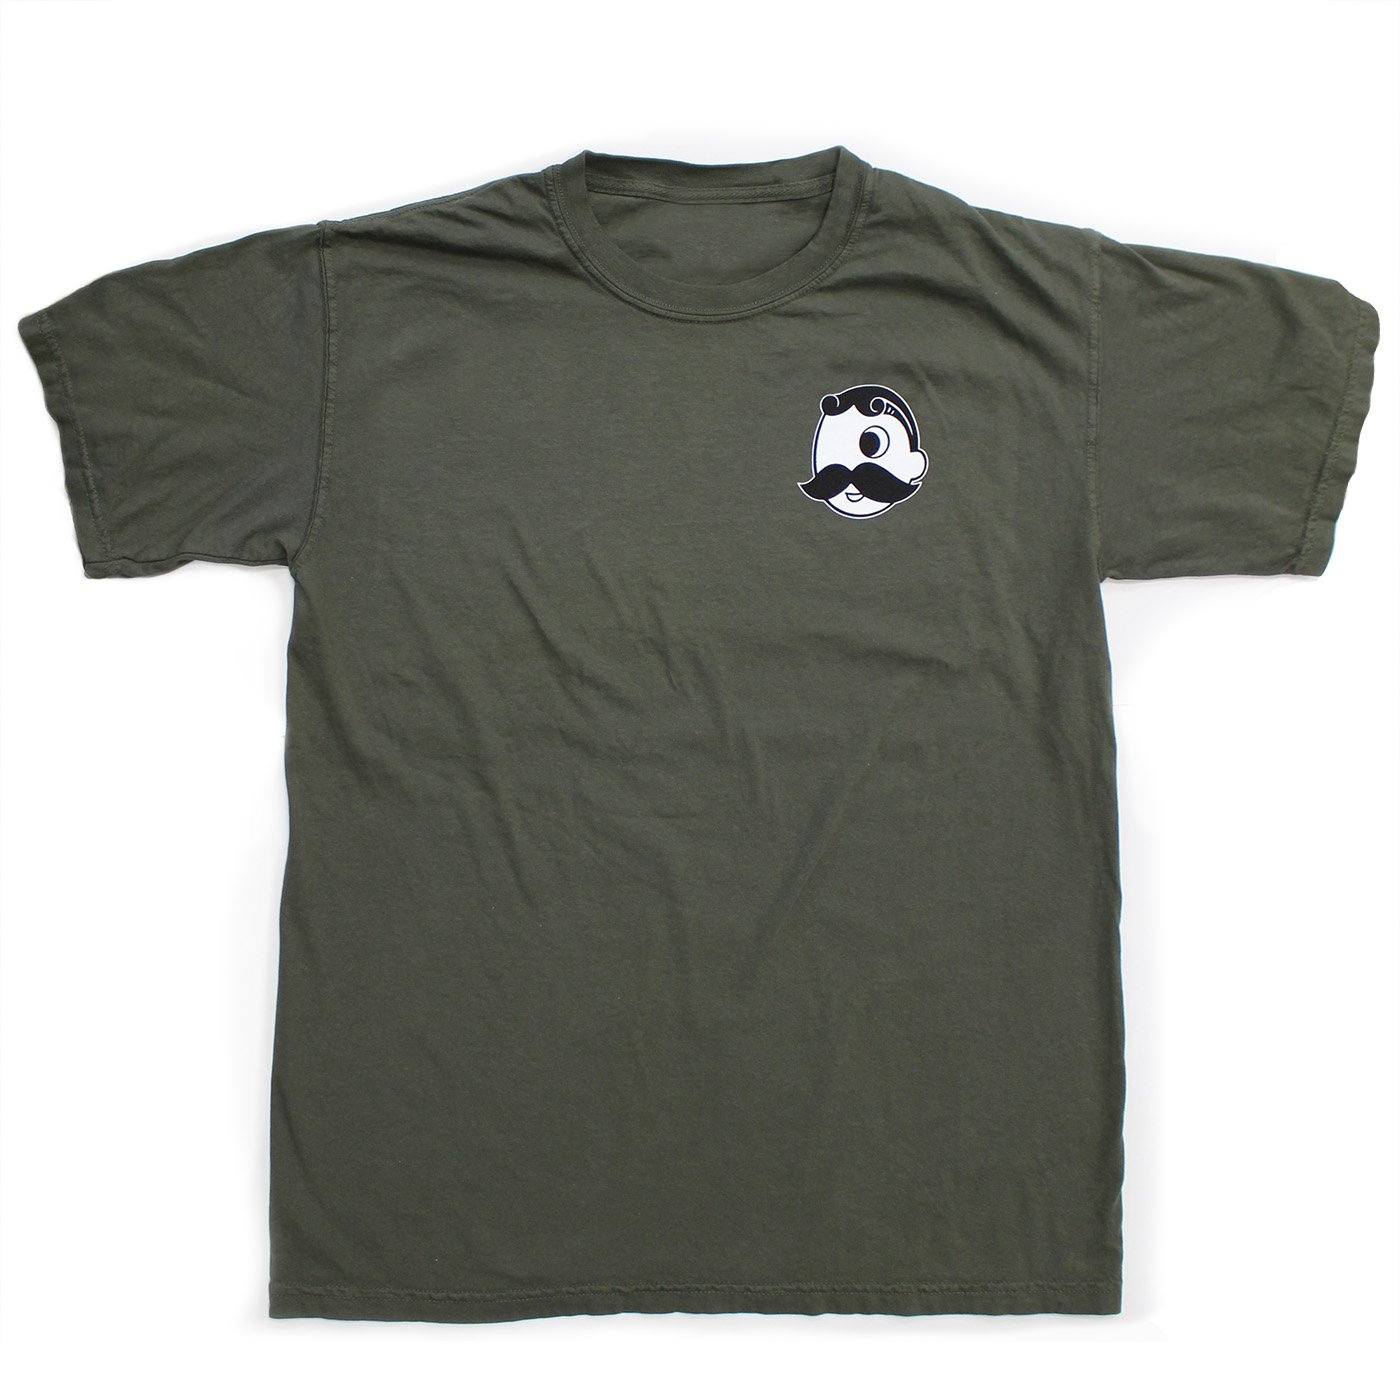 Natty Boh Can Surfboards (Sage) / Shirt - Route One Apparel